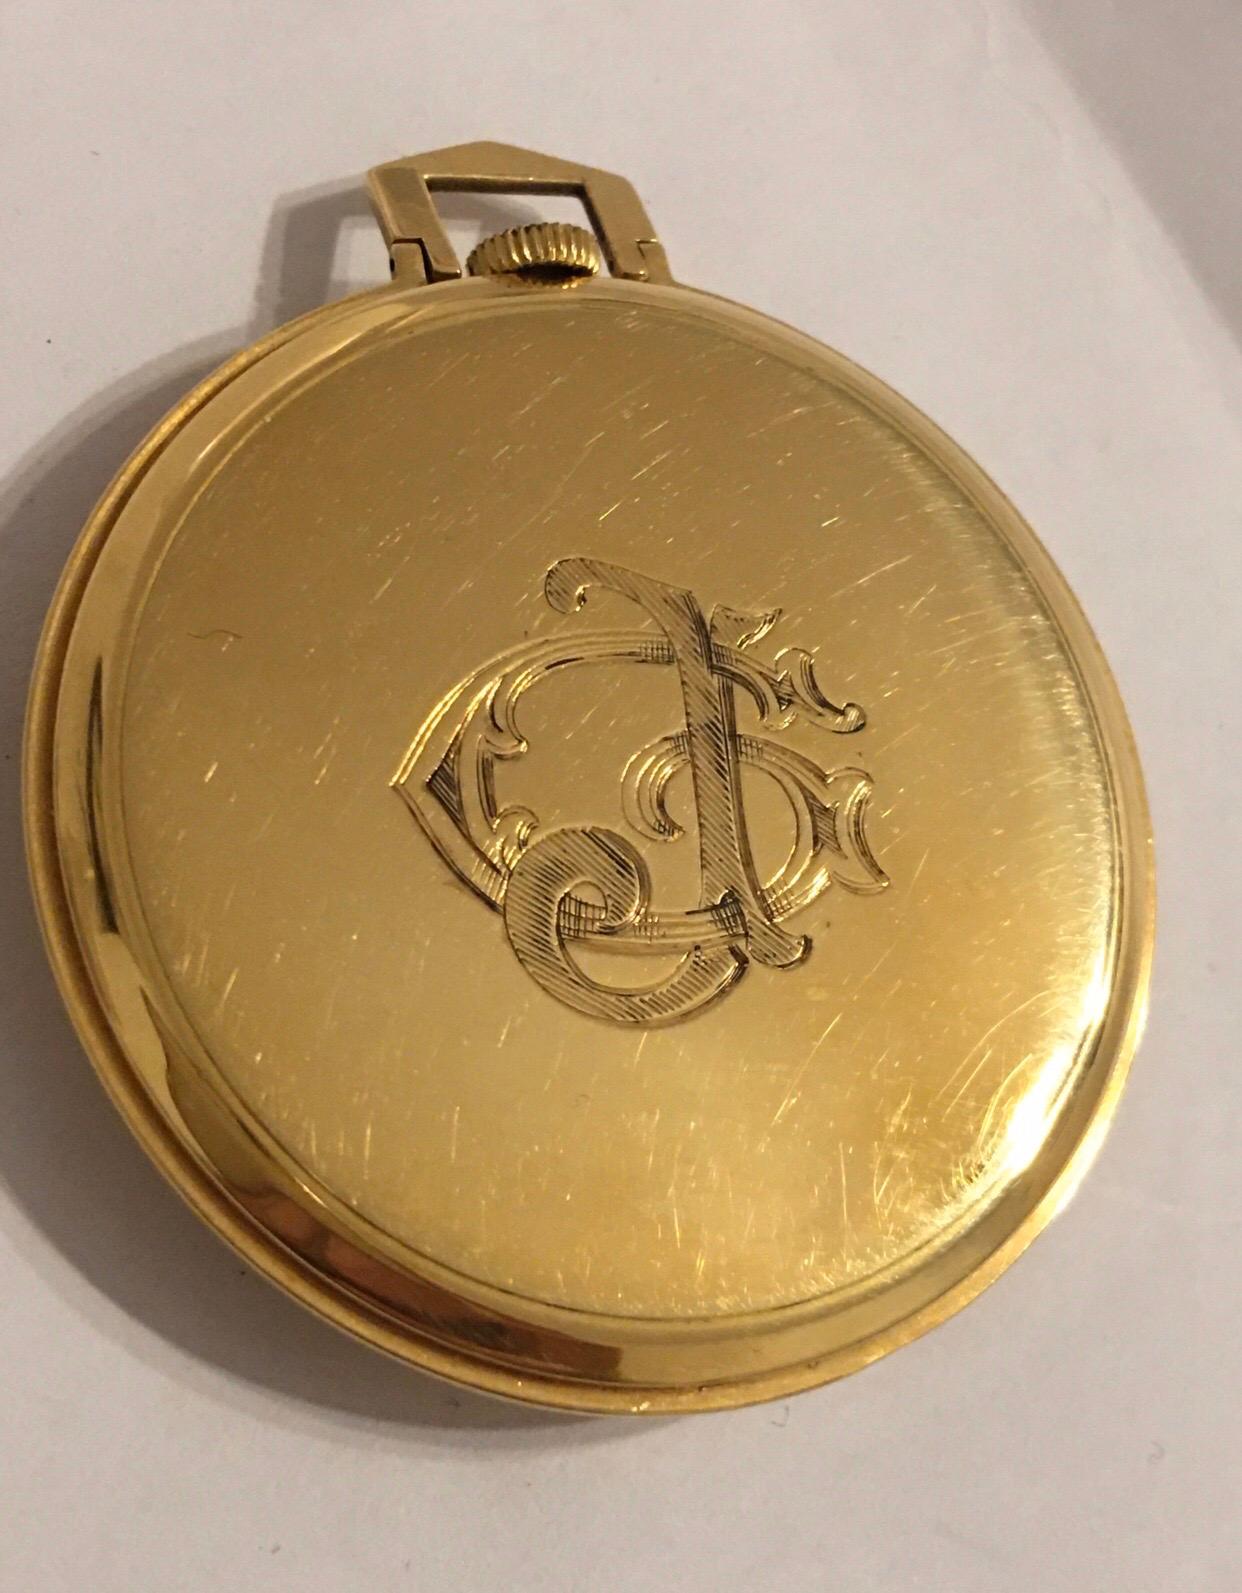 This beautiful rare and very fine quality 45mm diameter gold pocket watch is in good working condition and it is running well. It comes with an old box. This watch weighed 43.3 grams.

Please study the images carefully as form part of the